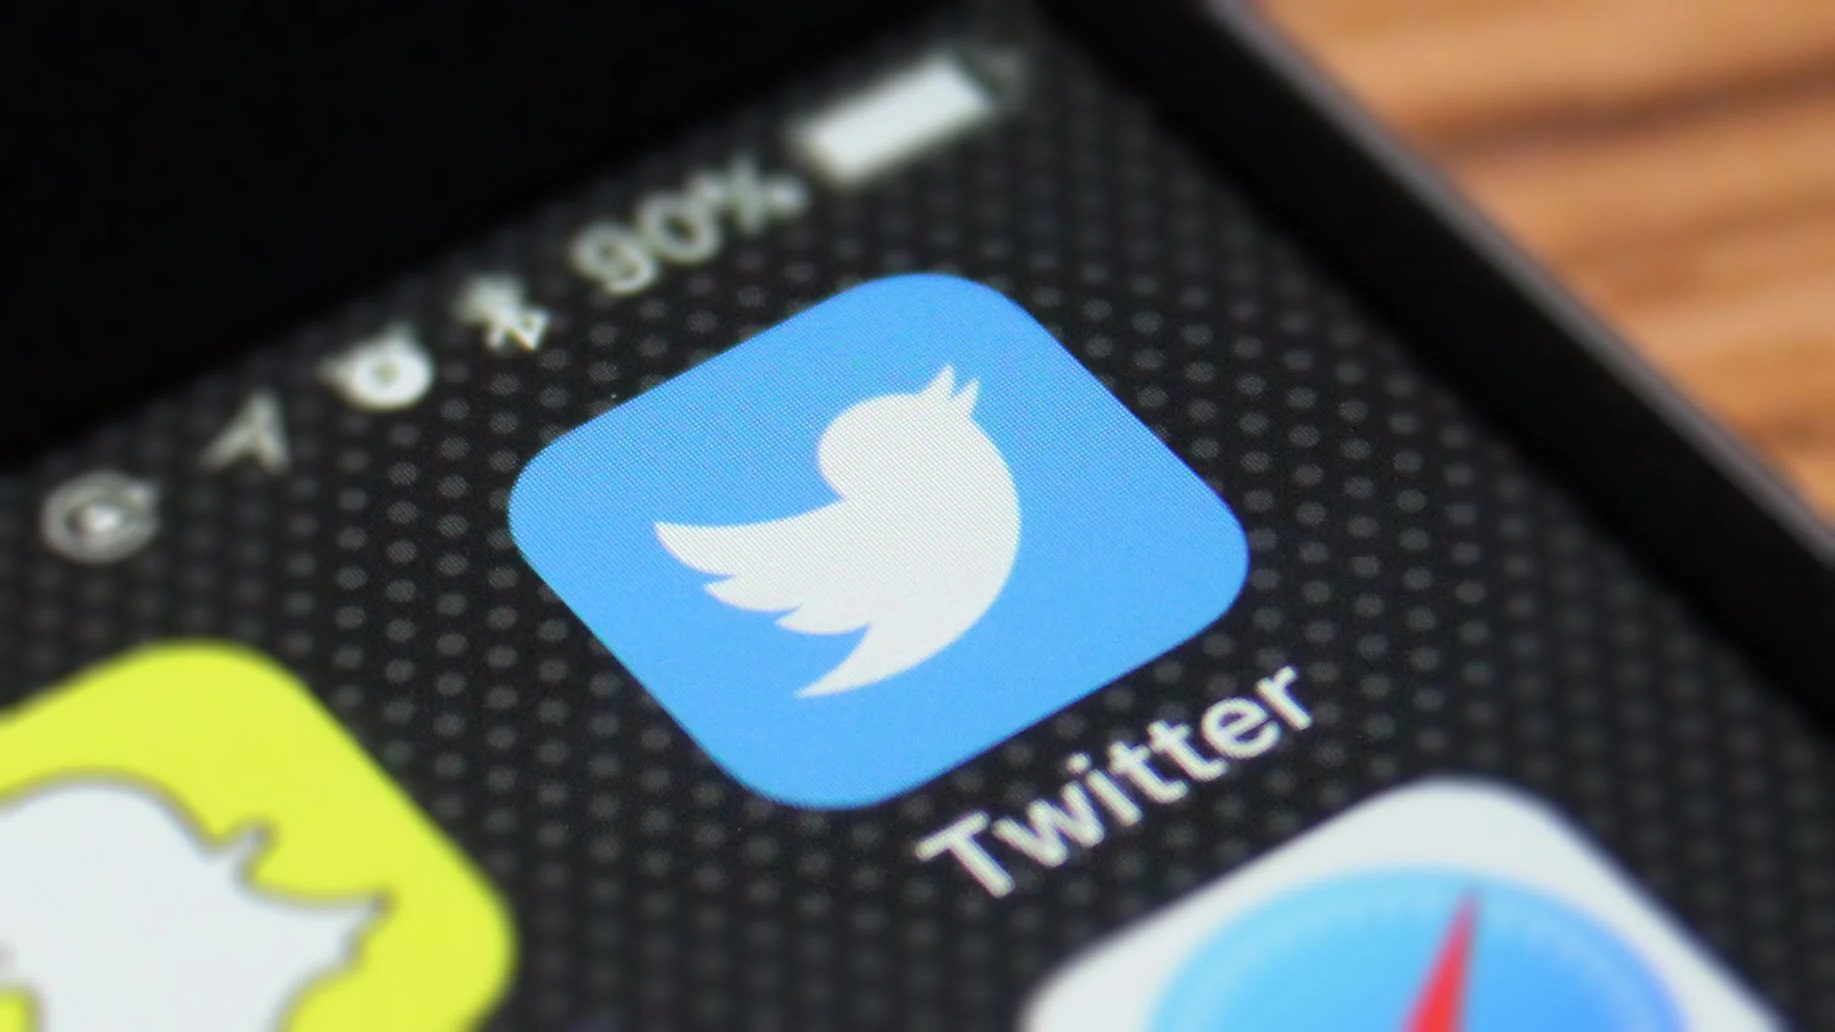 Twitter Begins Censoring Content Ahead of National Elections